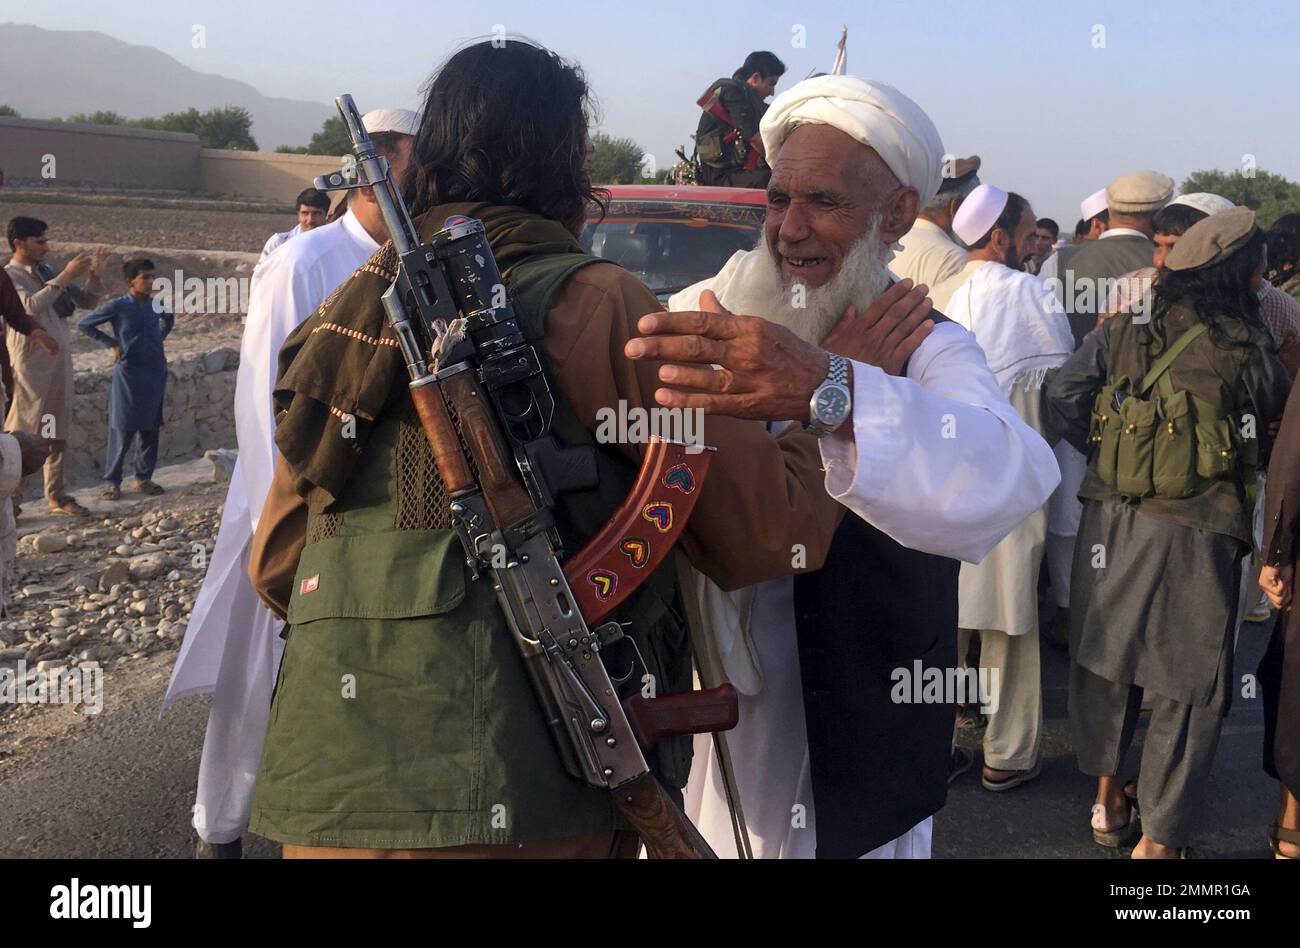 FILE - In this June 16, 2018 file photo, Taliban fighters gather with residents to celebrate a three-day cease fire marking the Islamic holiday of Eid al-Fitr, in Nangarhar province, east of Kabul, Afghanistan. On Sunday, Aug. 19, 2018, Afghan President Ashraf Ghani announced a conditional cease-fire with Taliban insurgents for the duration of the Eid al-Adha holiday. Ghani made the announcement Sunday during celebrations of the 99th anniversary of Afghanistan's independence. (AP Photo/Rahmat Gul, File) Foto Stock